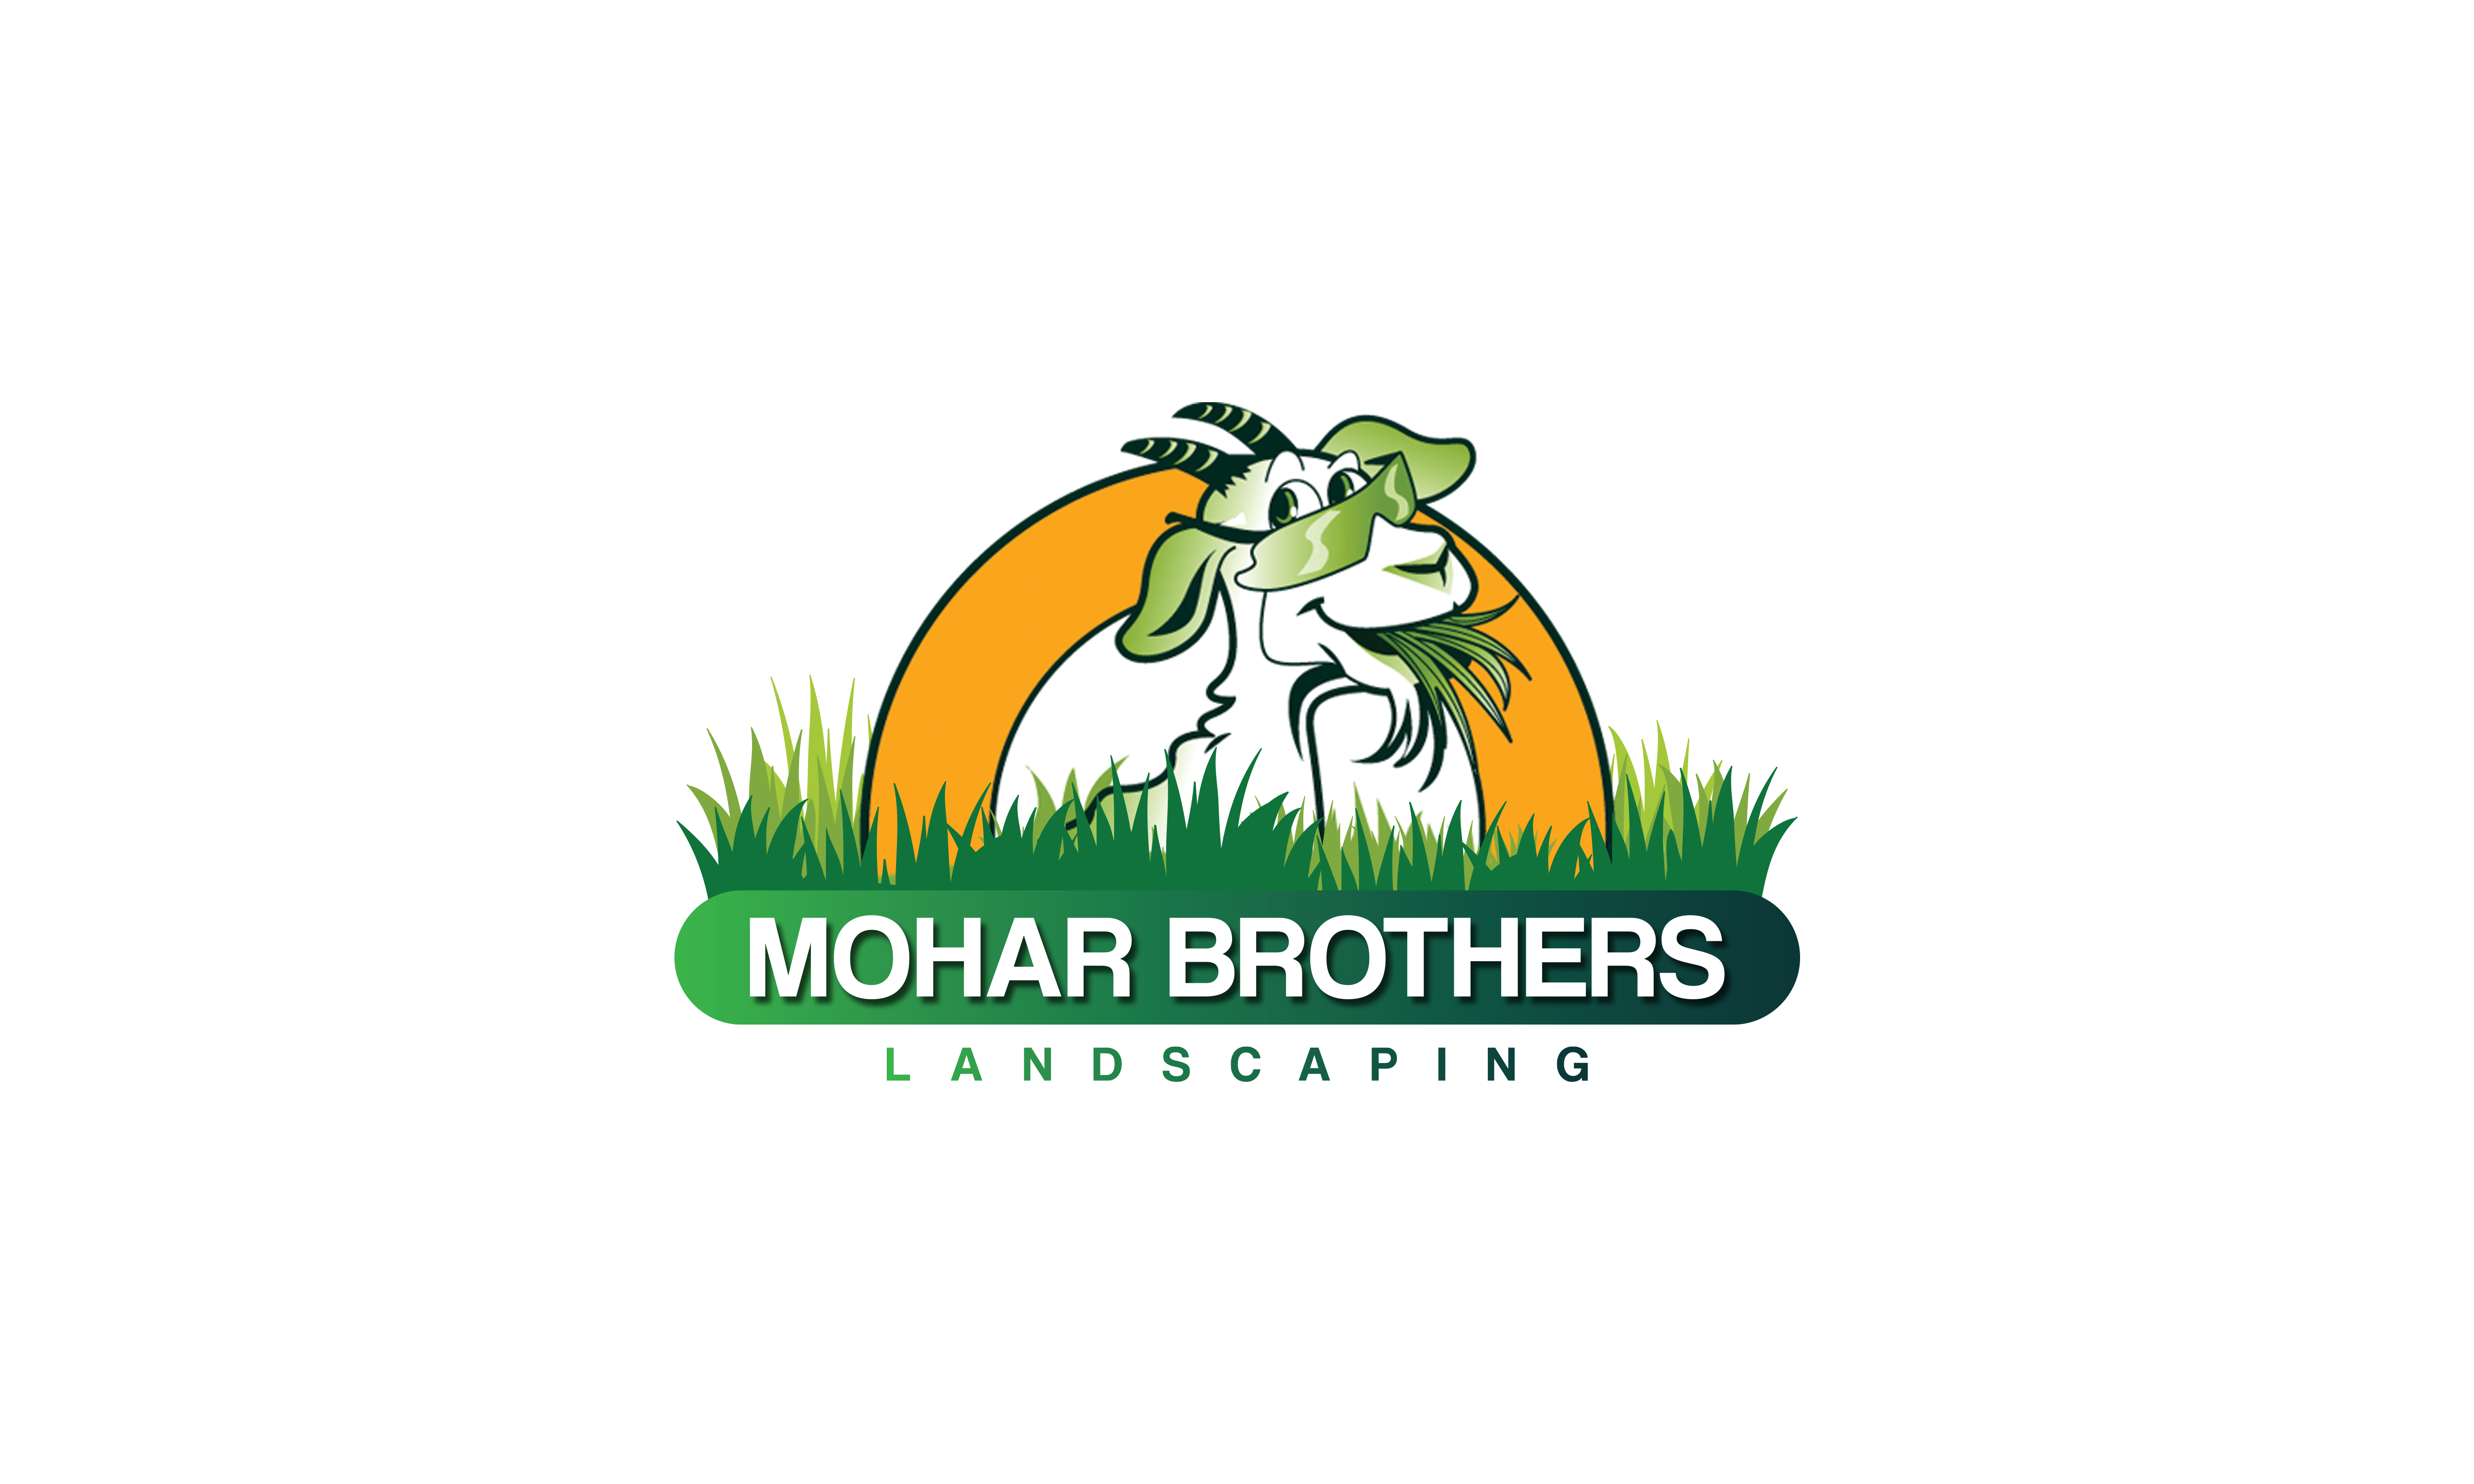 Mohar Brothers Landscaping